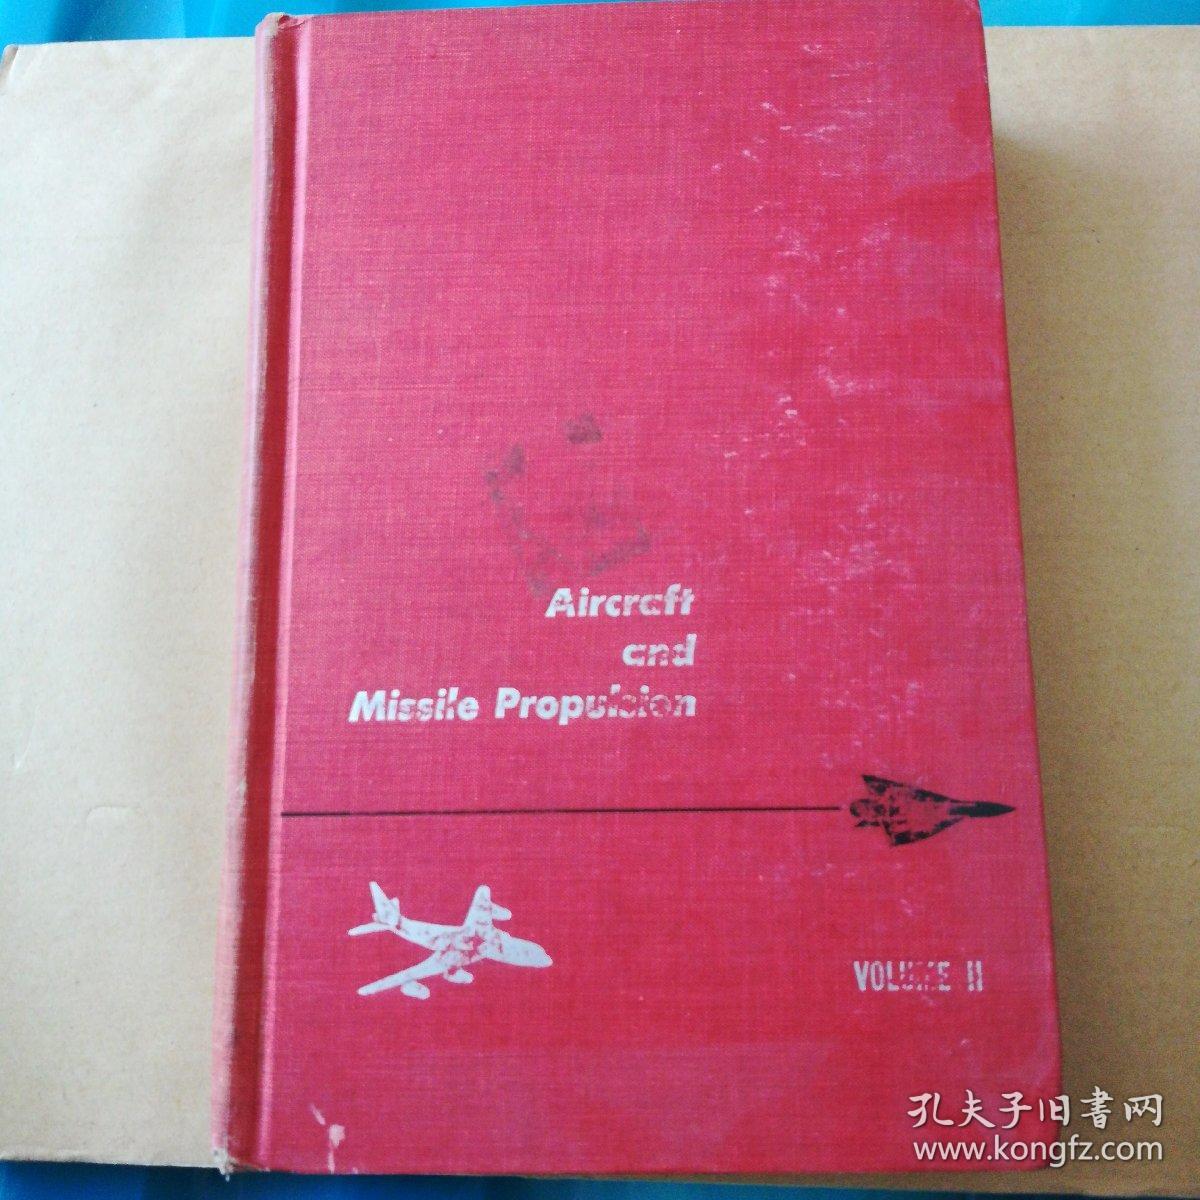 Aircraft and missile propulsion Volume ll
The gas Turbine power plant, the turboprop, turbojet,Ramjet,and Rocket Engines